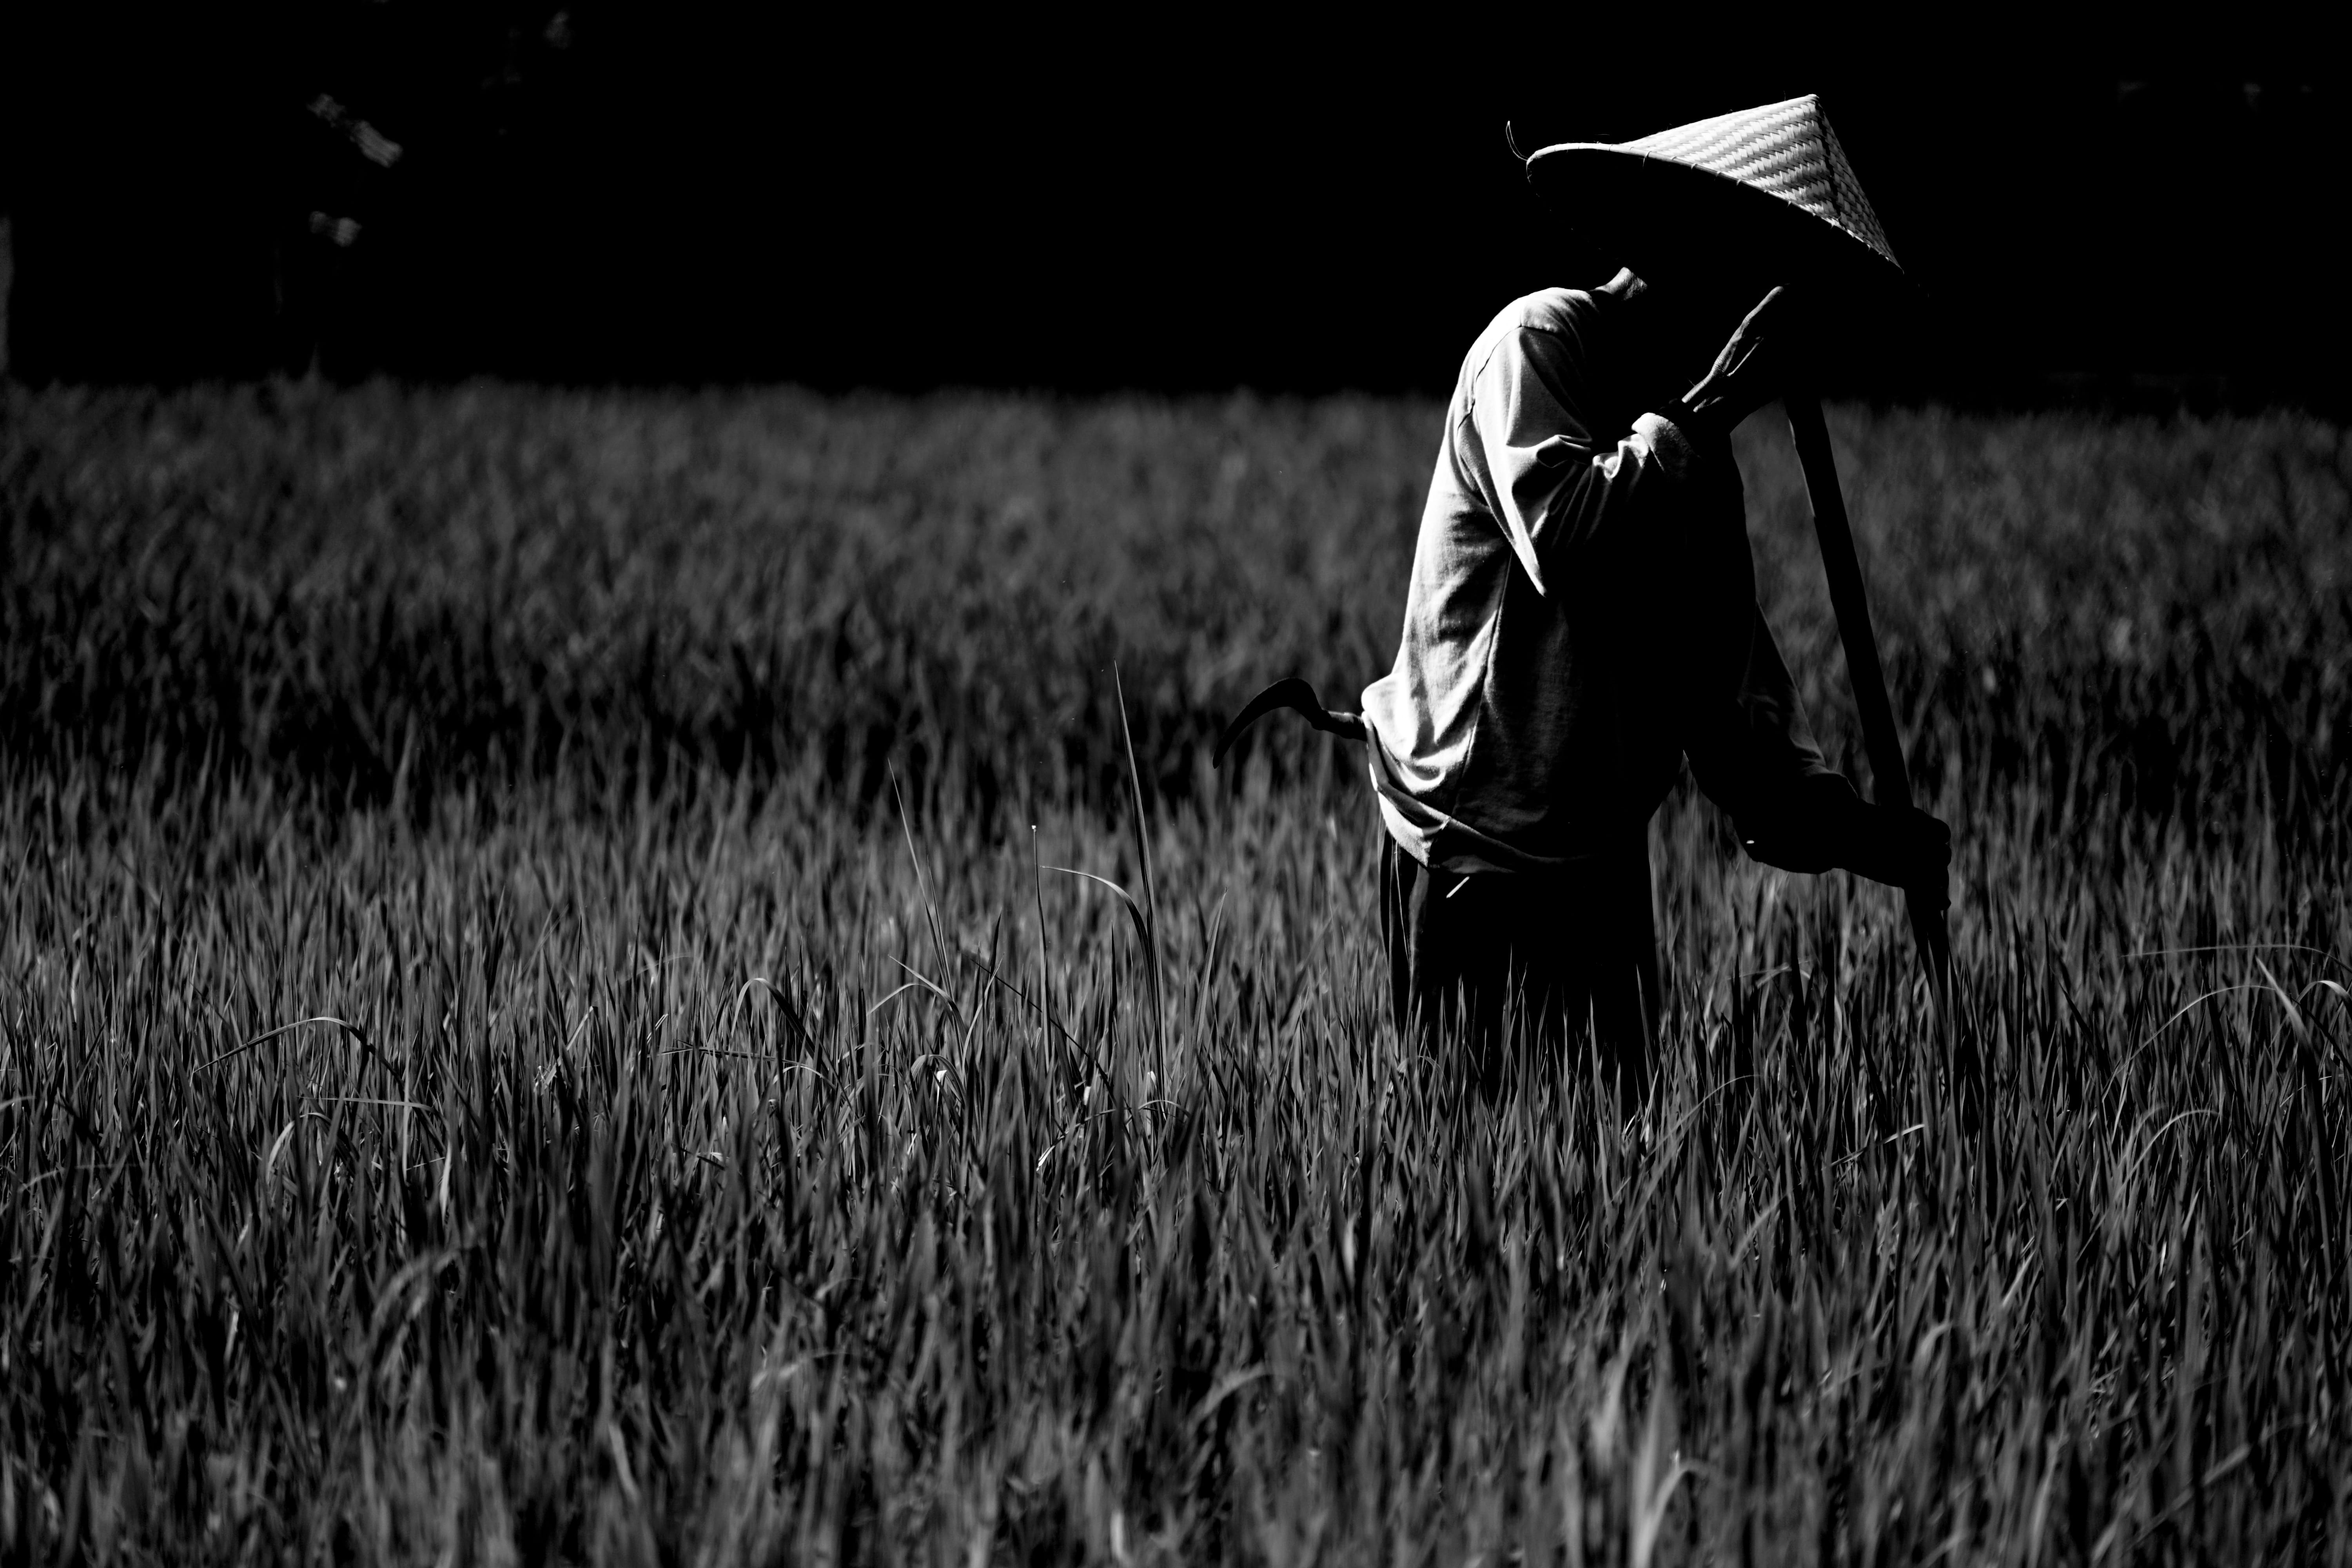 field, rice, farmer, indonesia, bali, one person, land, real people